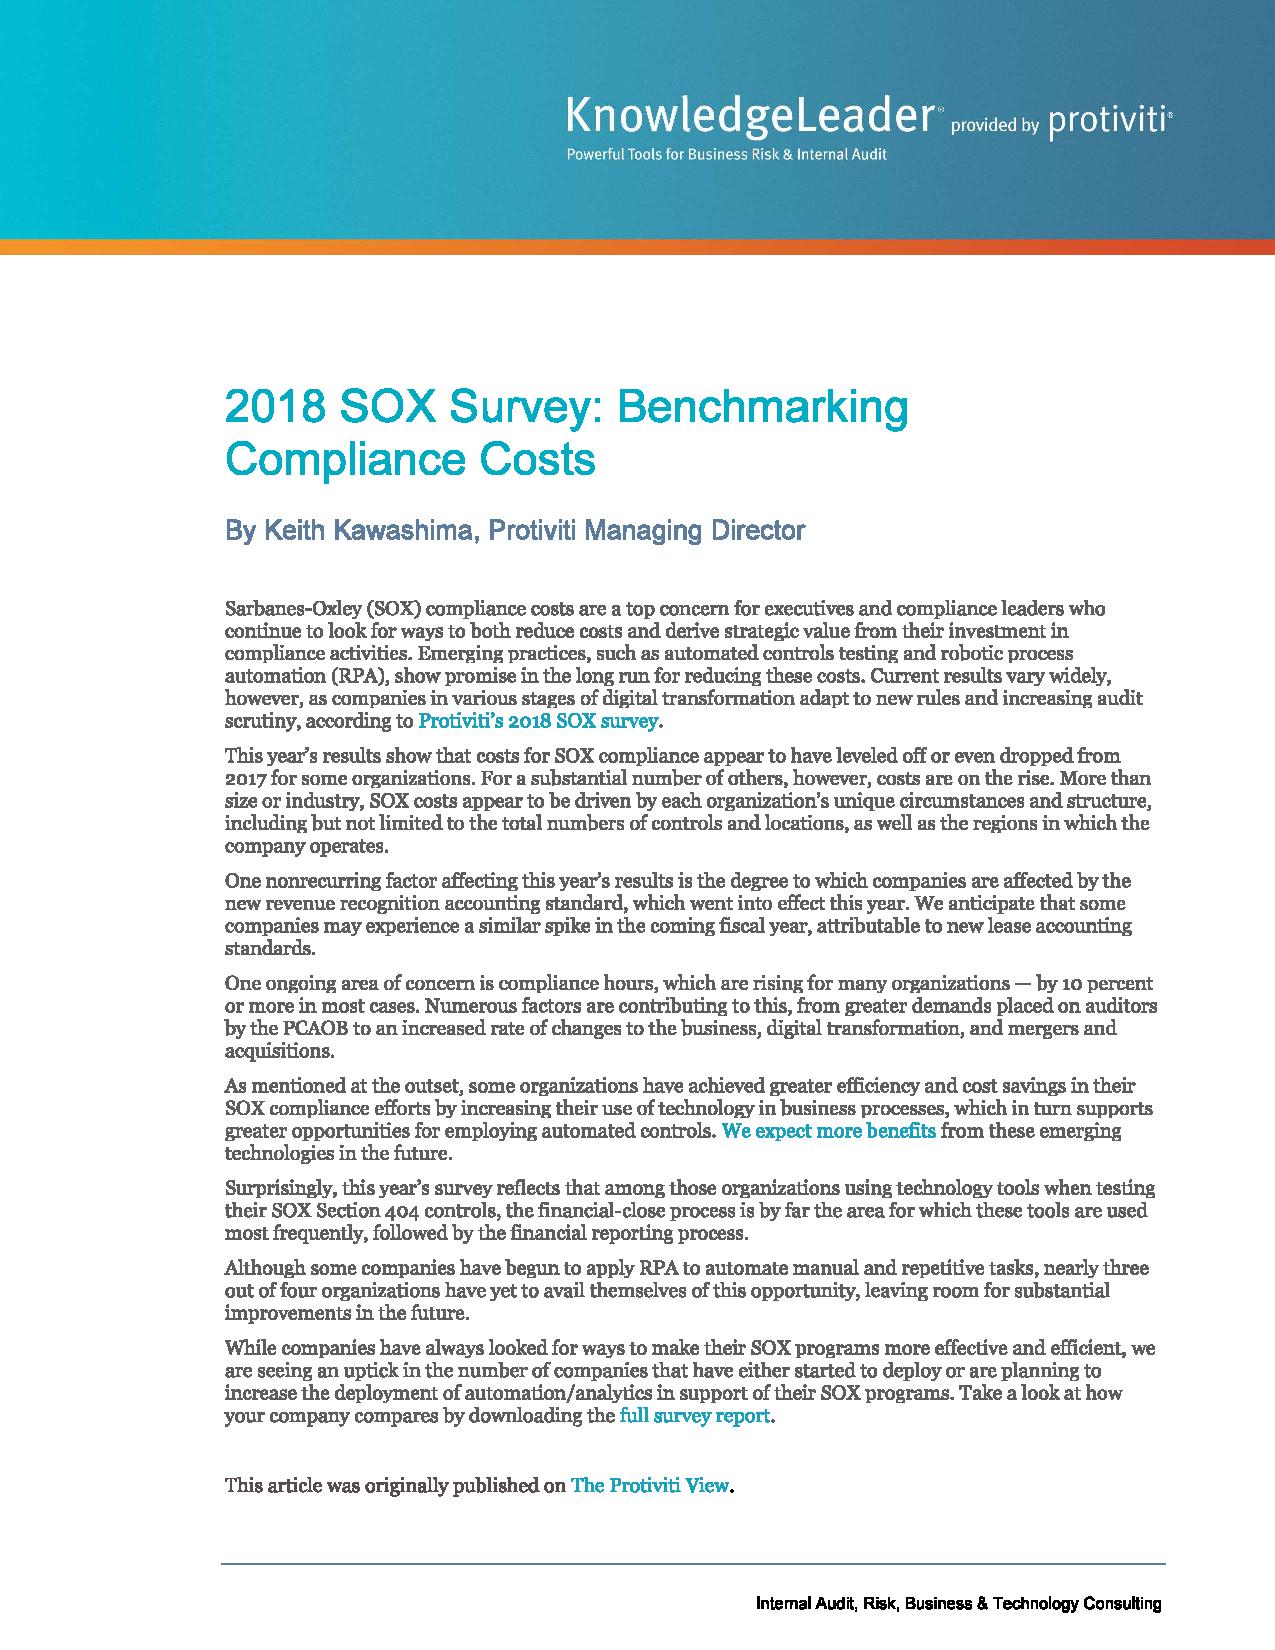 Screenshot of the first page of 2018 SOX Survey: Benchmarking Compliance Costs